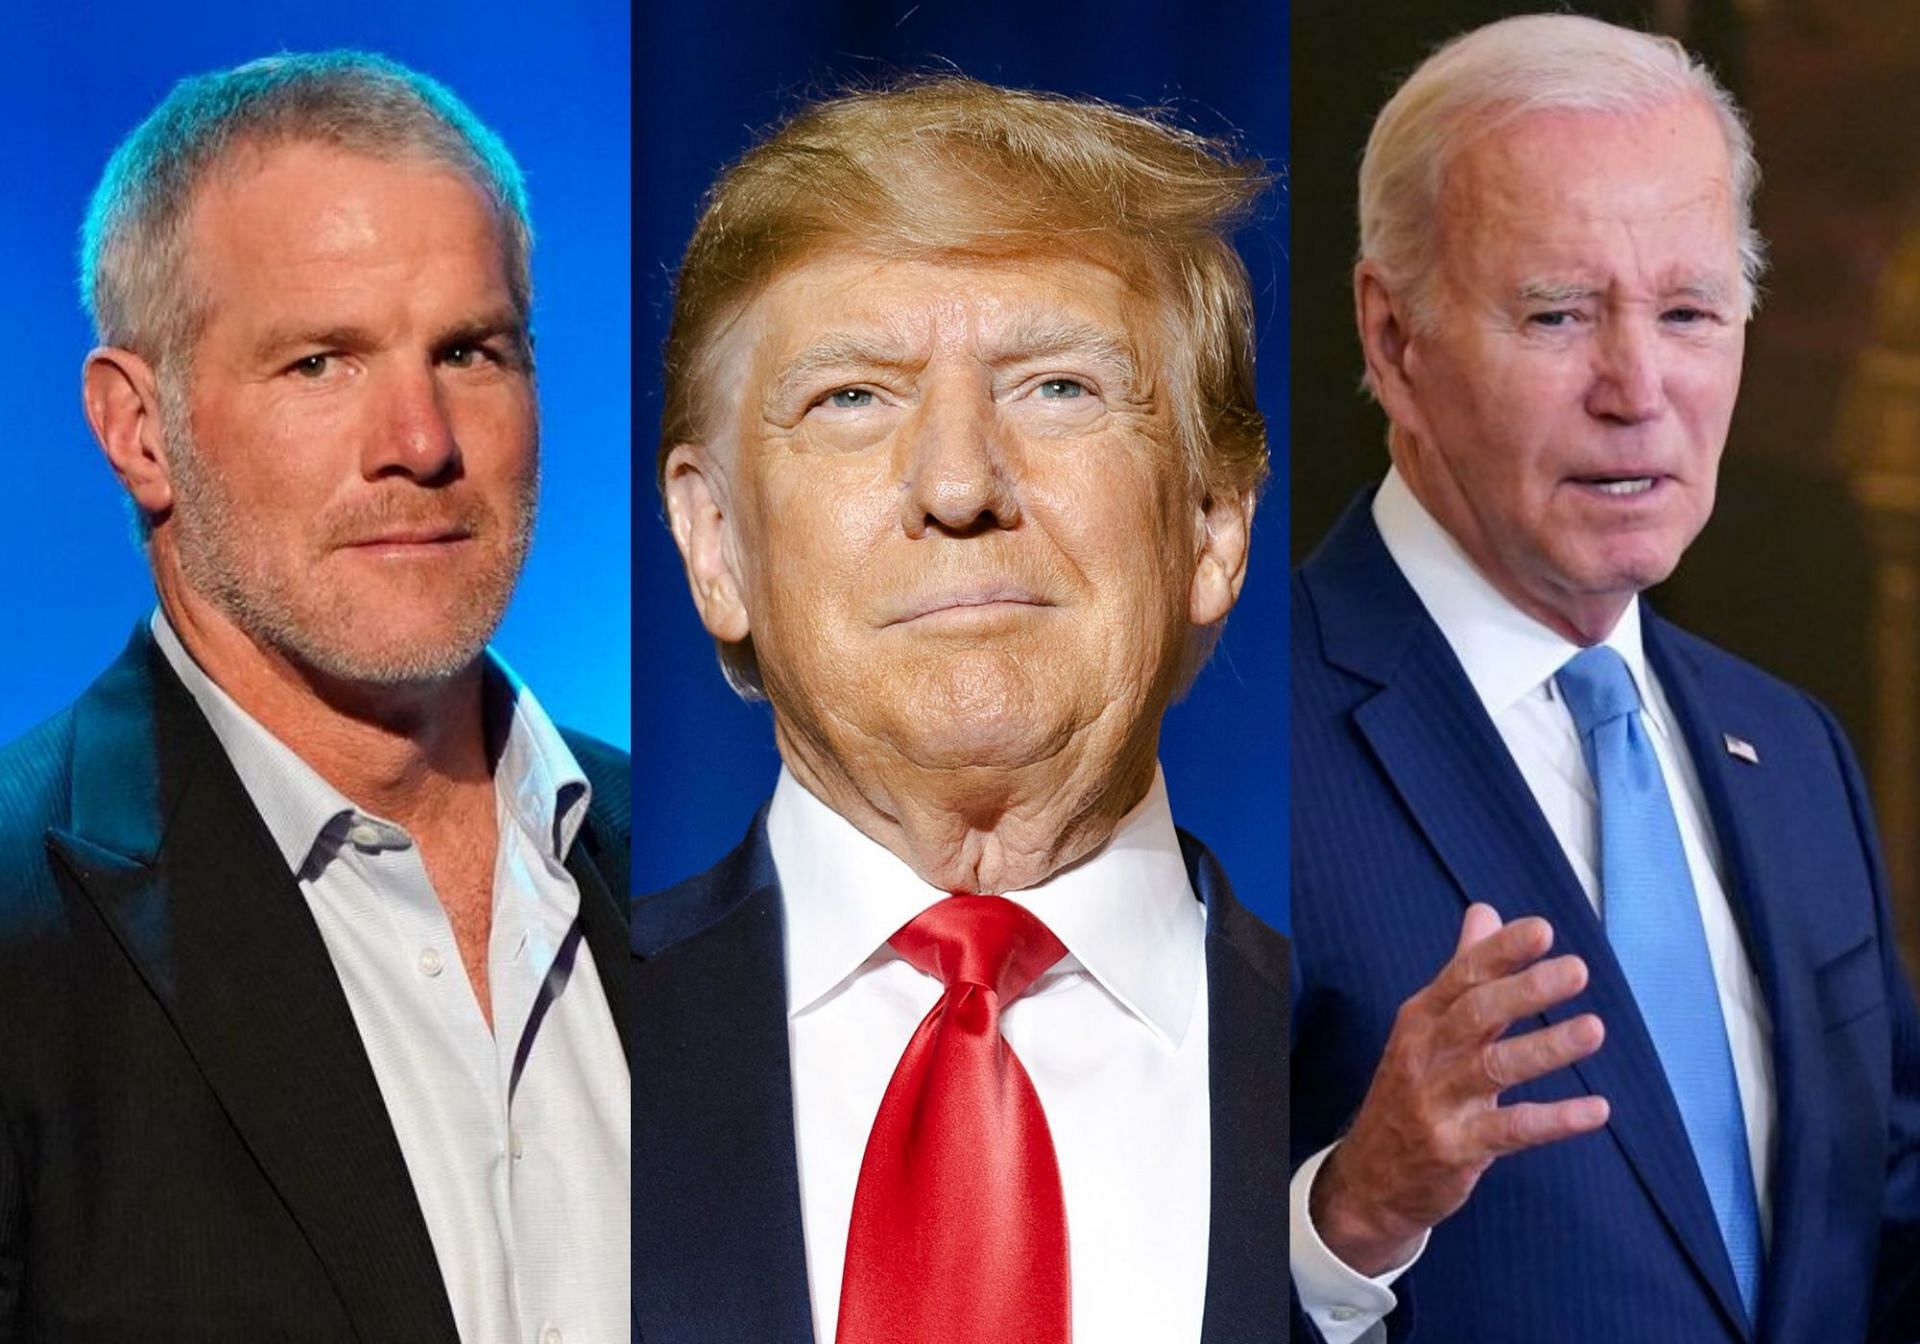 What did Brett Favre say about Donald Trump?